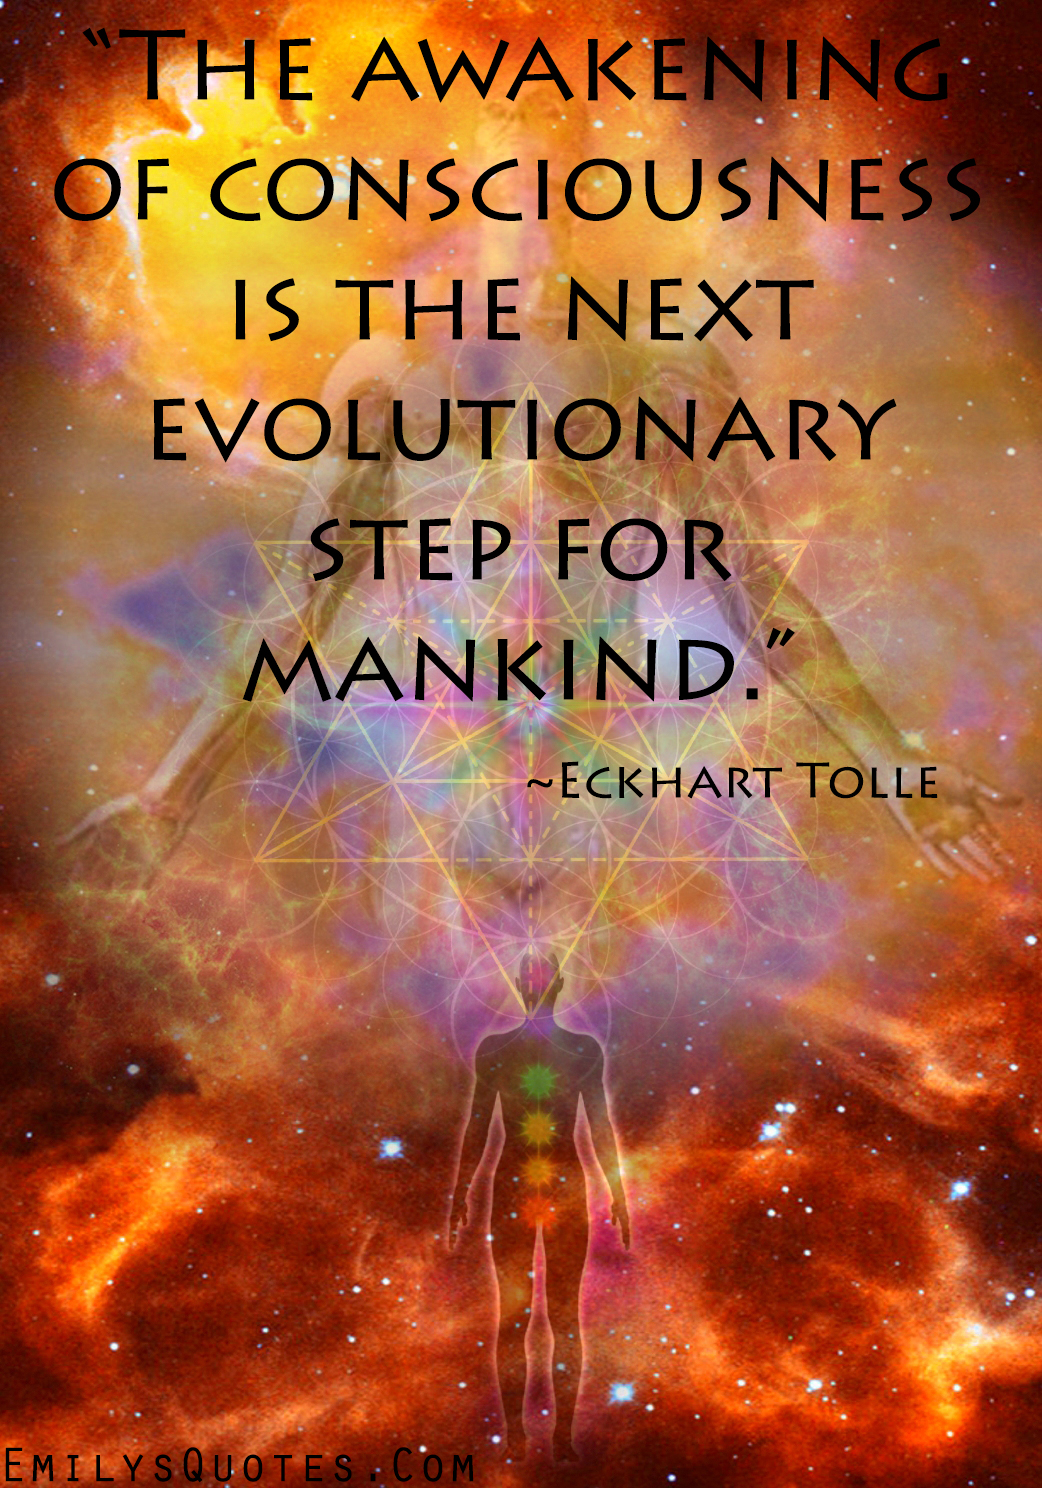 The awakening of consciousness is the next evolutionary step for mankind